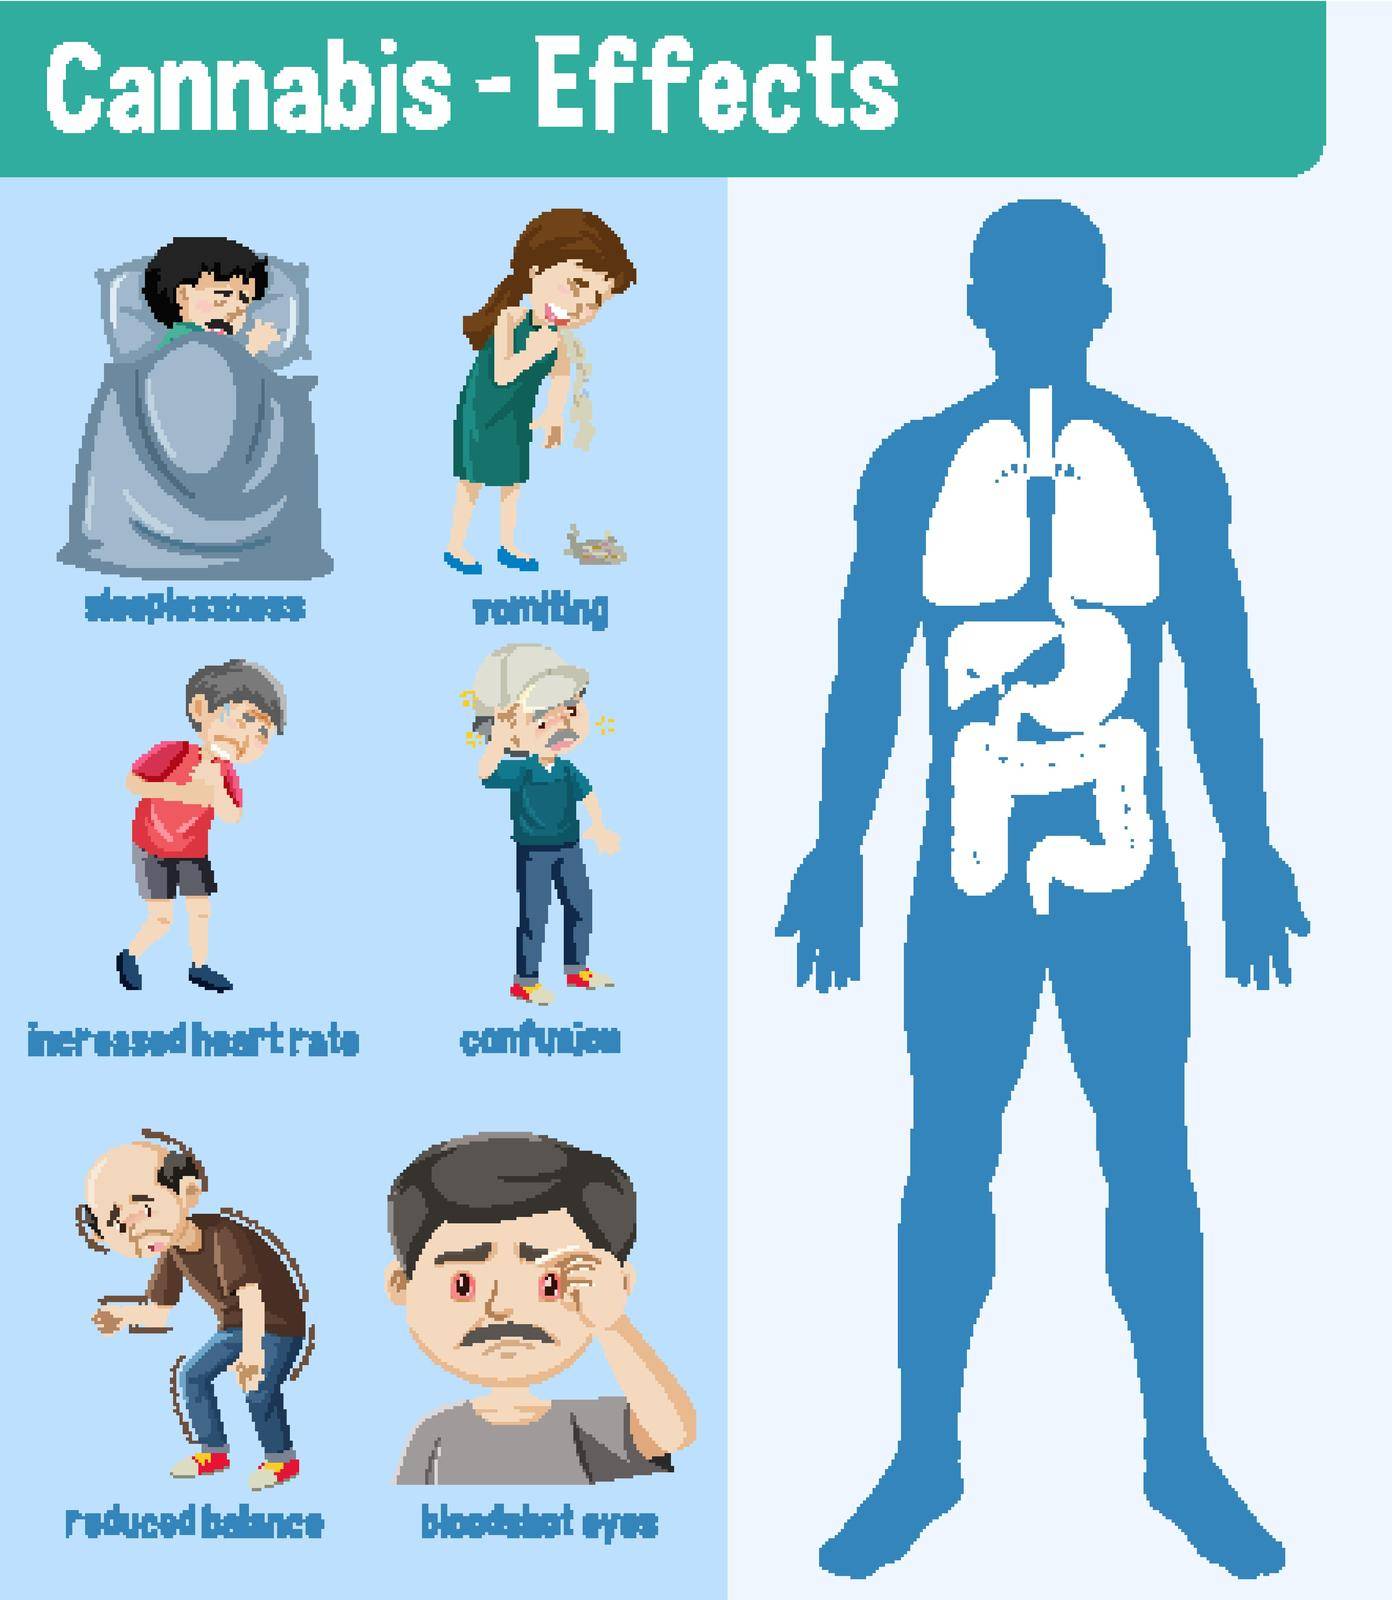 Health effects of Cannabis Infographic illustration